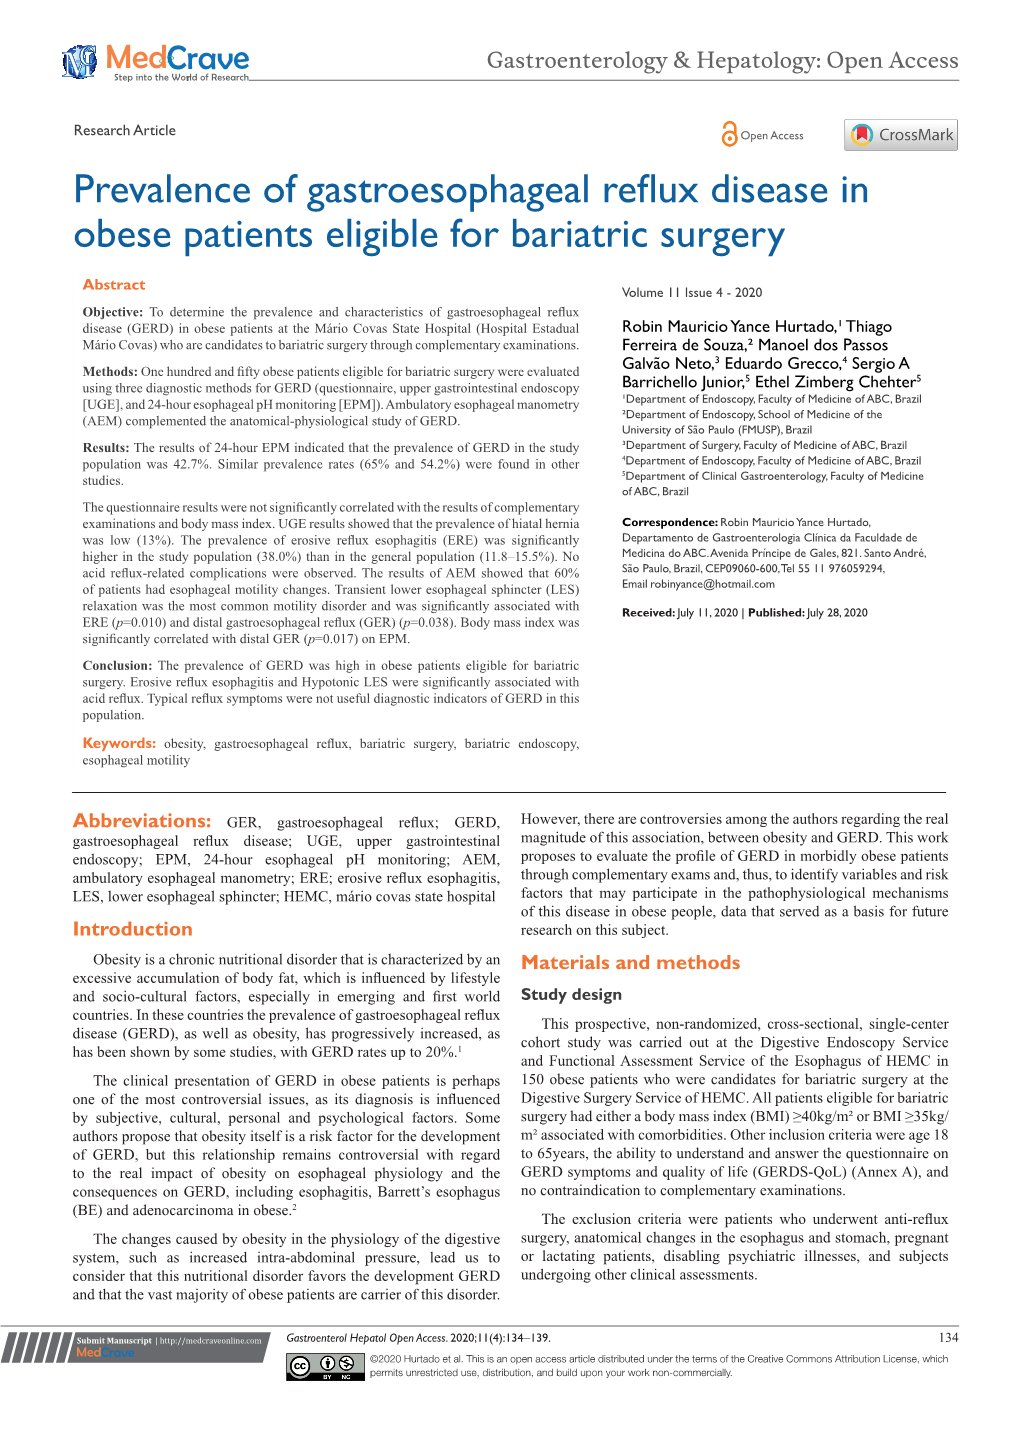 Prevalence of Gastroesophageal Reflux Disease in Obese Patients Eligible for Bariatric Surgery